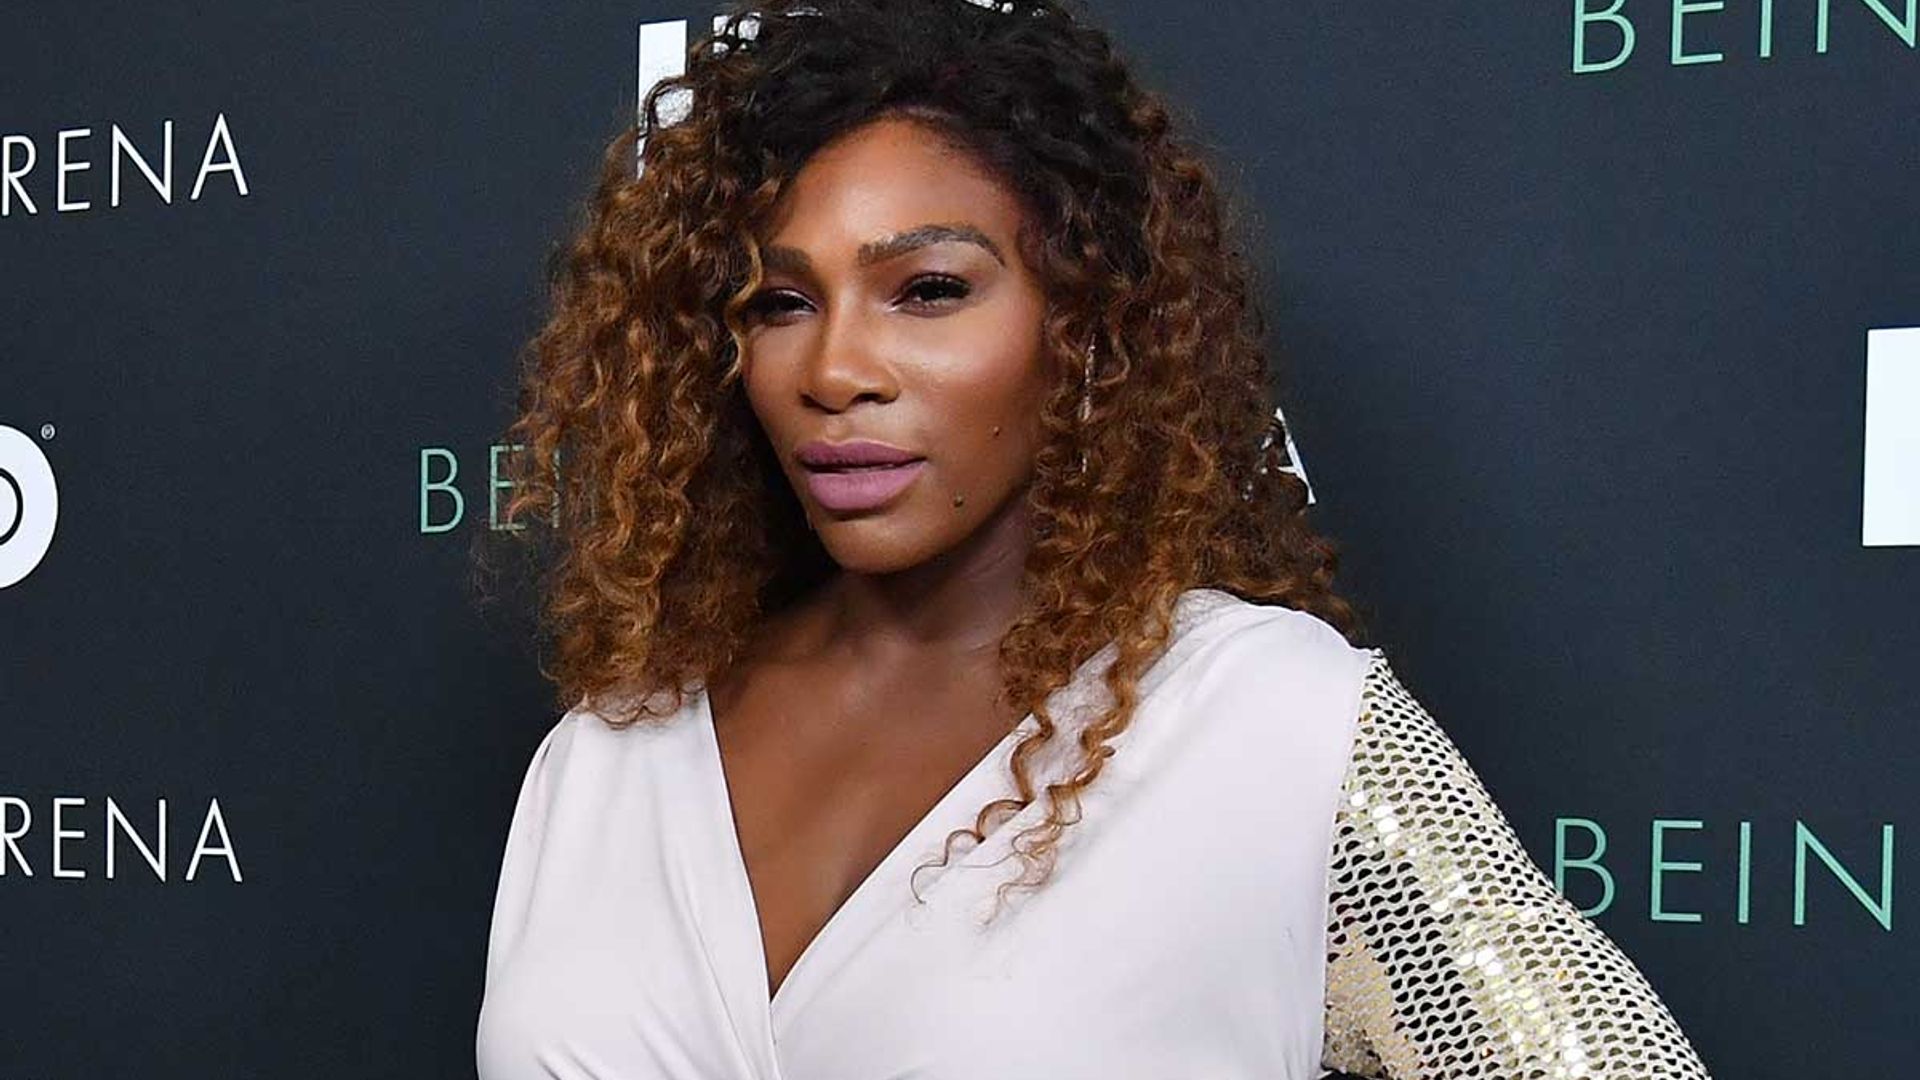 Serena Williams is a vision in gorgeous wedding dress for joyous celebration